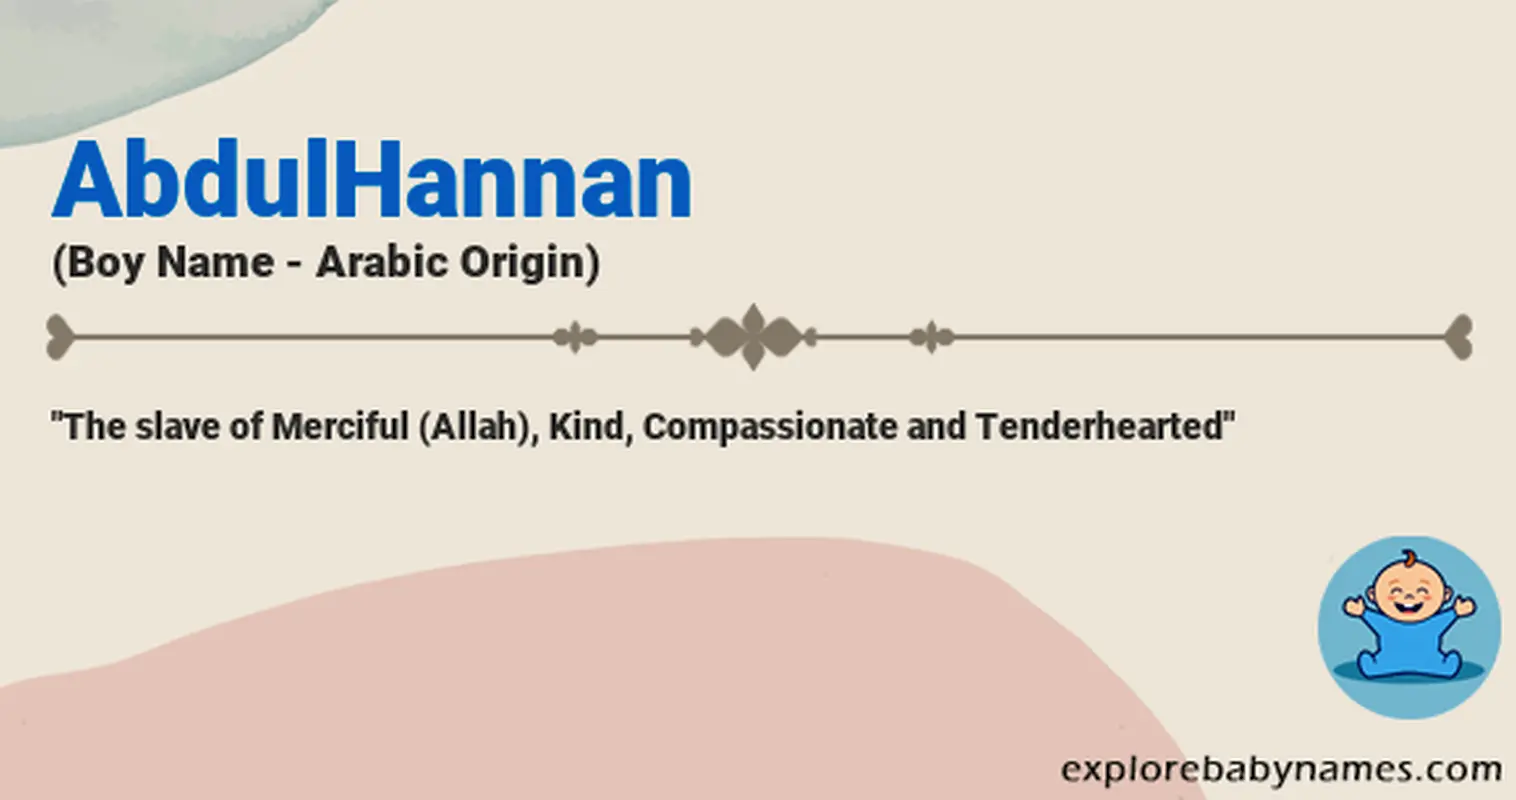 Meaning of AbdulHannan